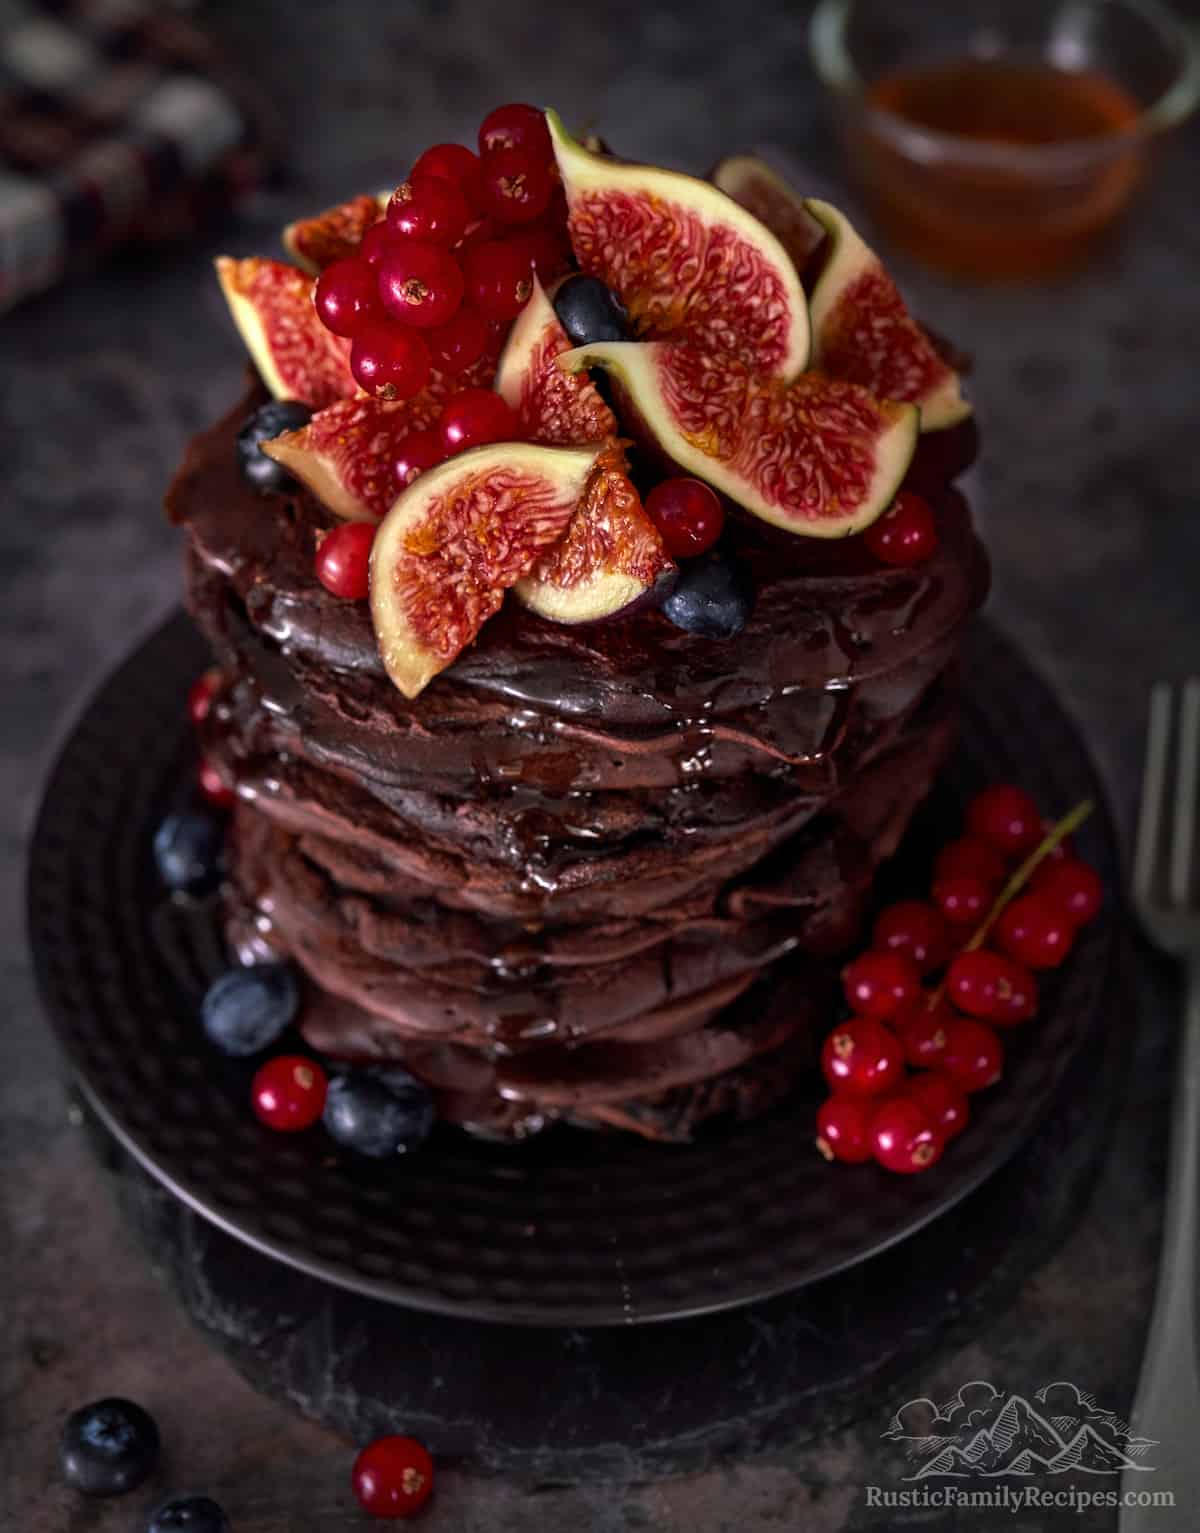 A tall stack of chocolate pancakes topped with figs, currants and blueberries